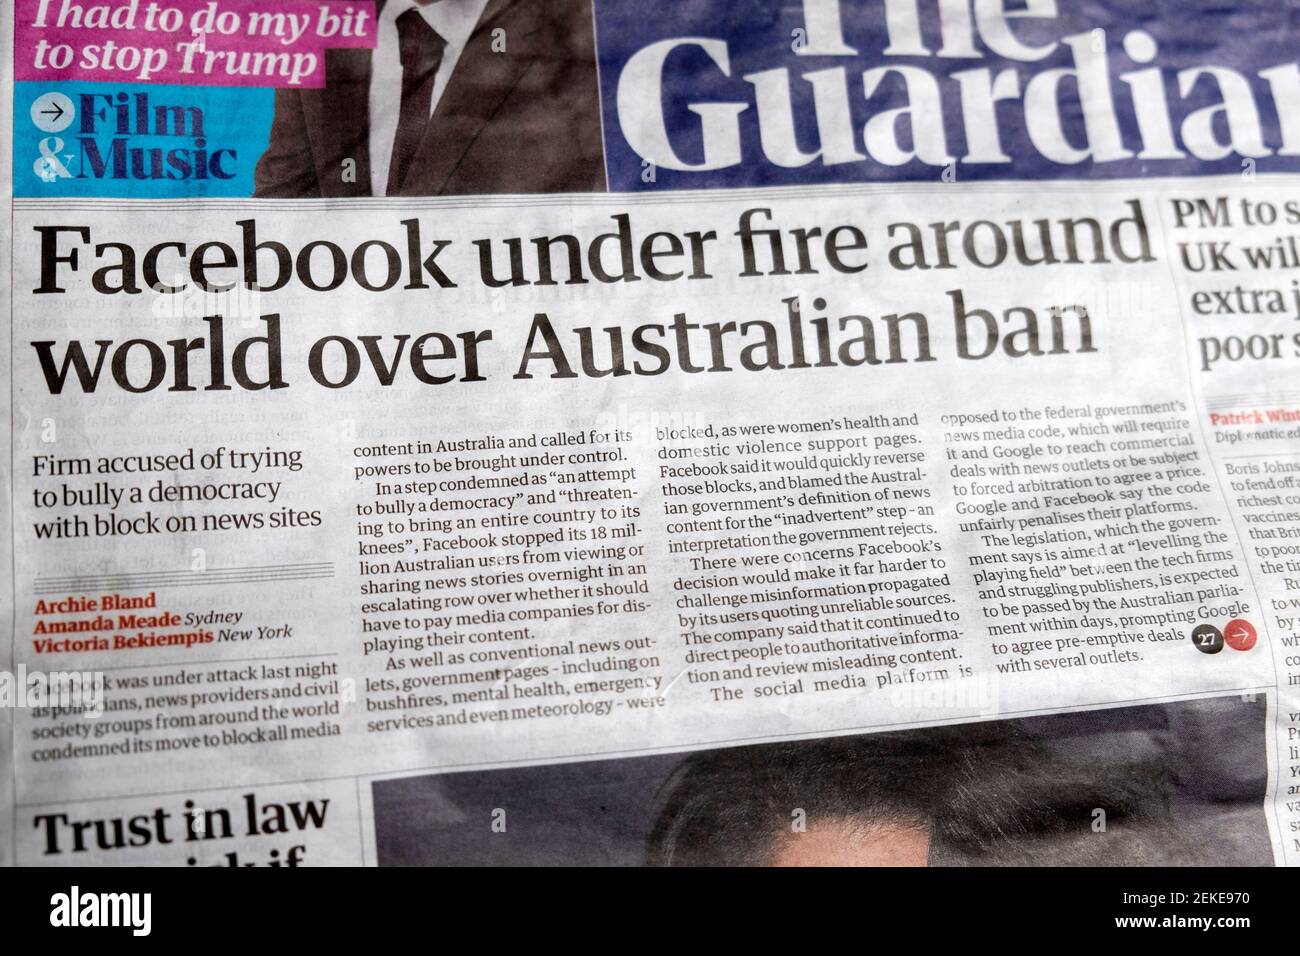 Facebook Under Fire Around World Over Australian Ban Guardian Front Page Newspaper Headline Australia News Article On 19 February 2021 Stock Photo Alamy